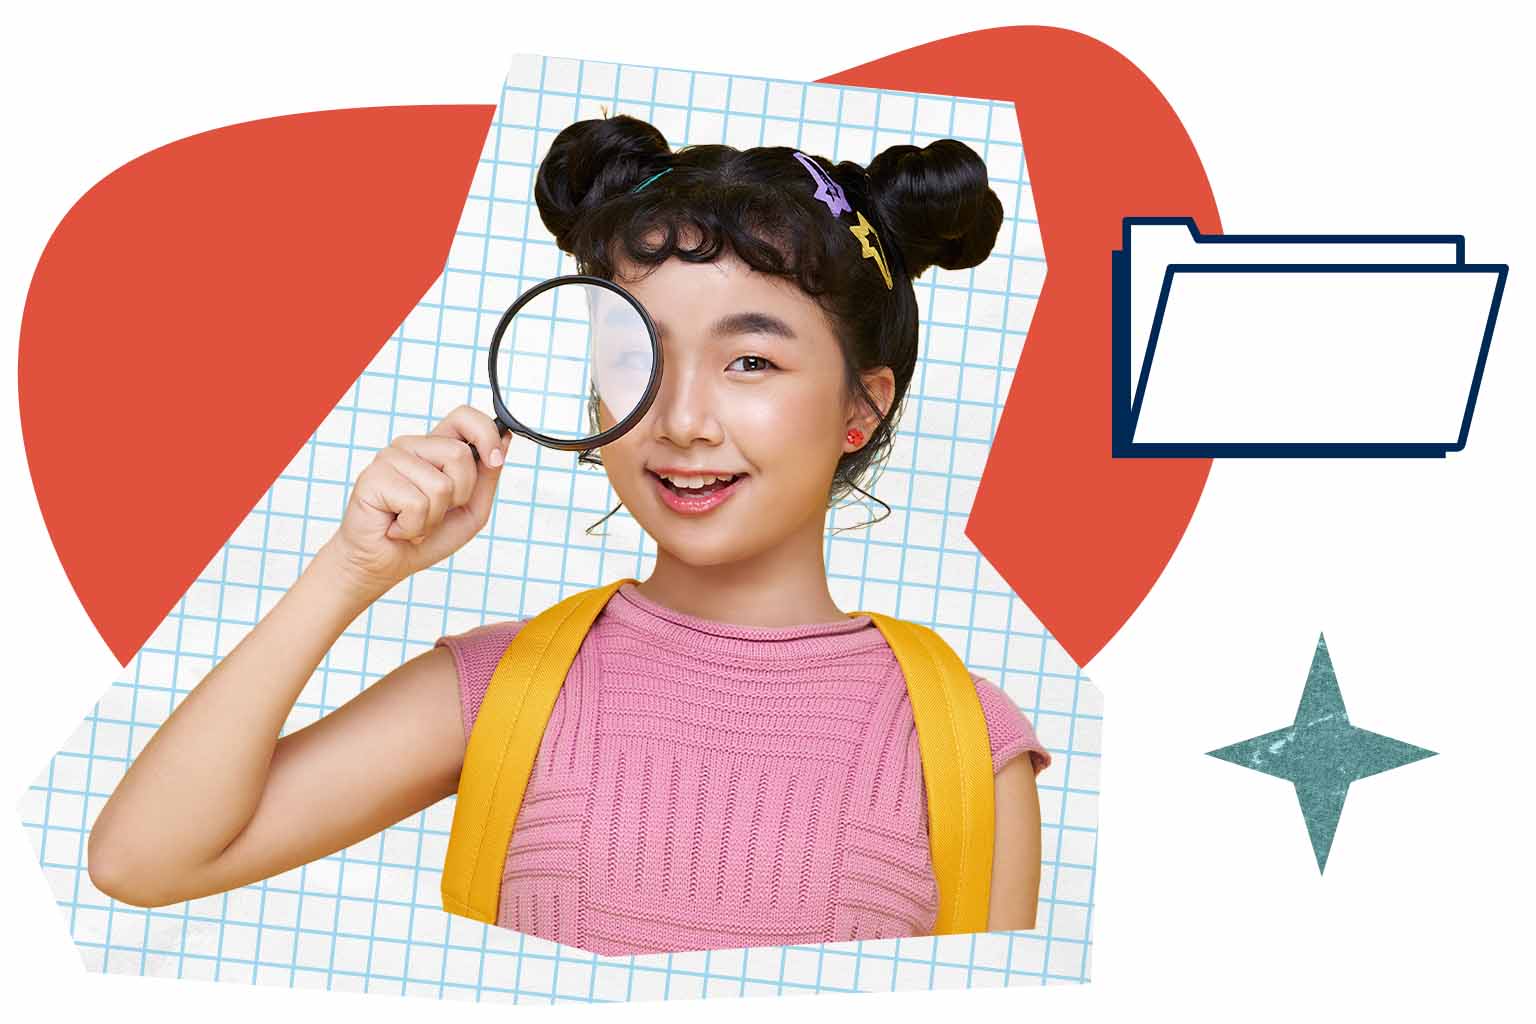 Smiling girl wearing a yellow backpack and looking at the viewer through a magnifying glass.